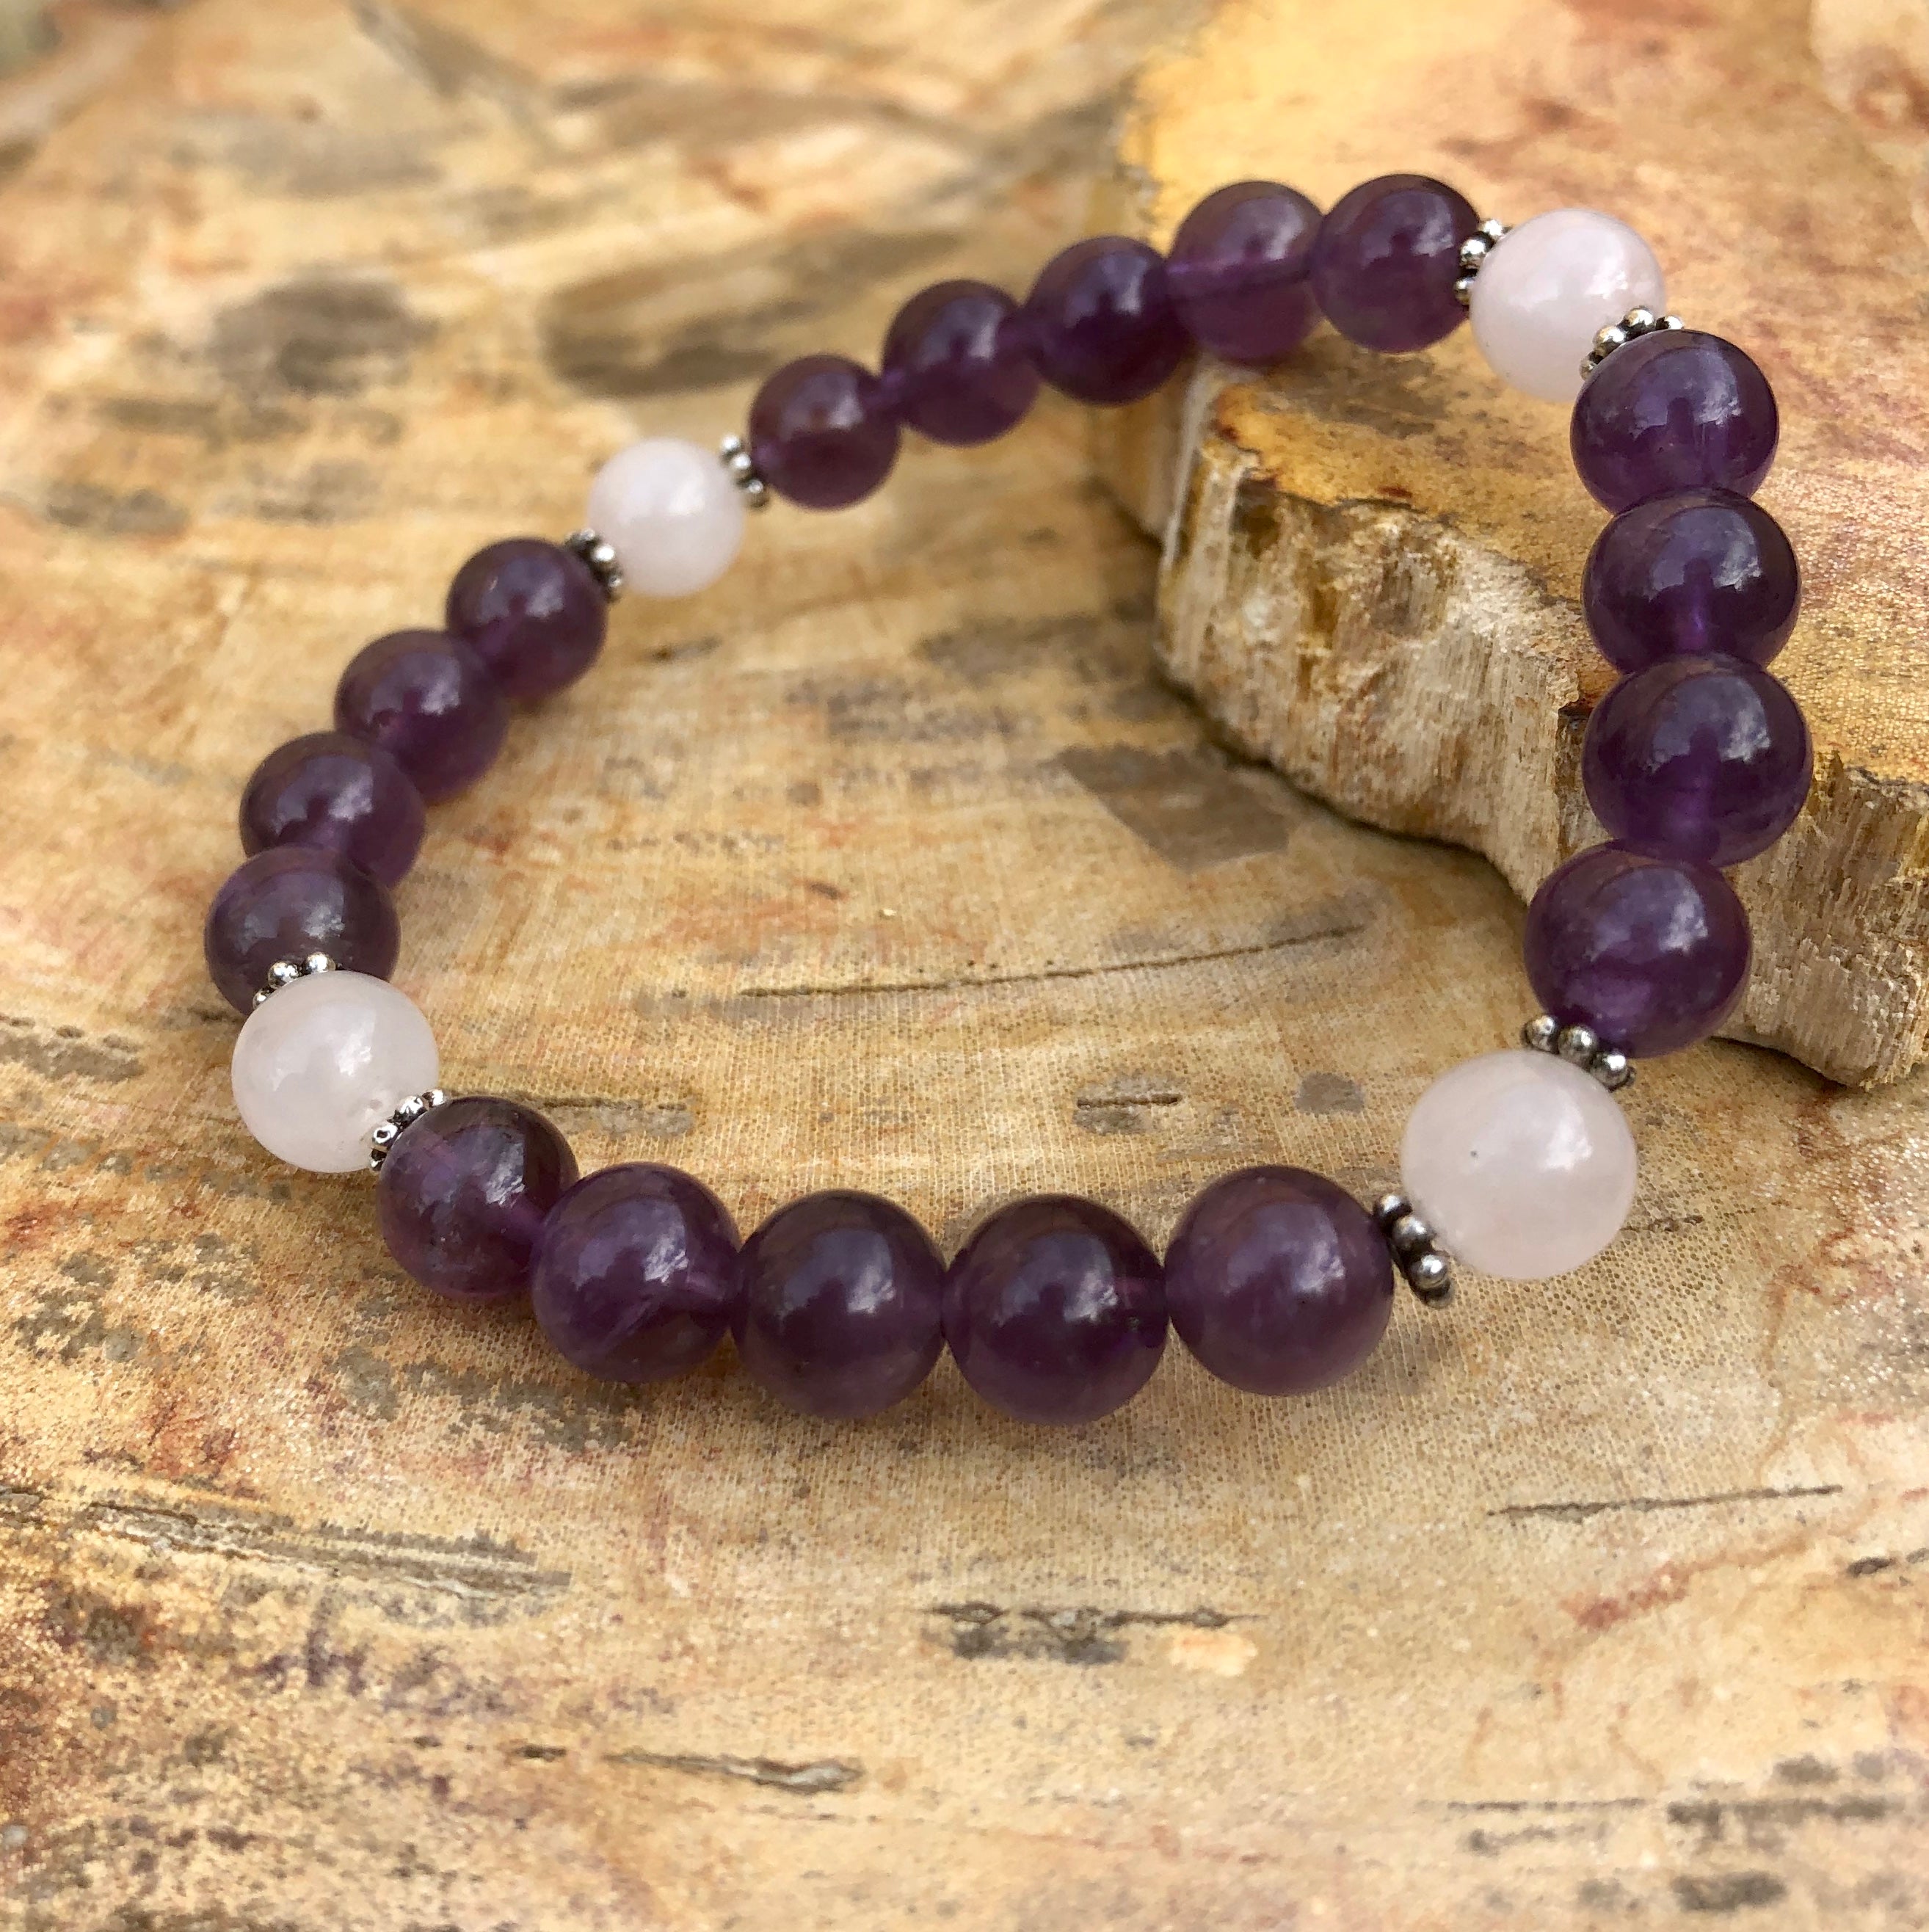 Natural Amethyst & Rose Quartz Stretch Bracelet for Healing and Calmness - Handmade in USA with Hypoallergenic Components - Bracelets - Bijou Her -  -  - 